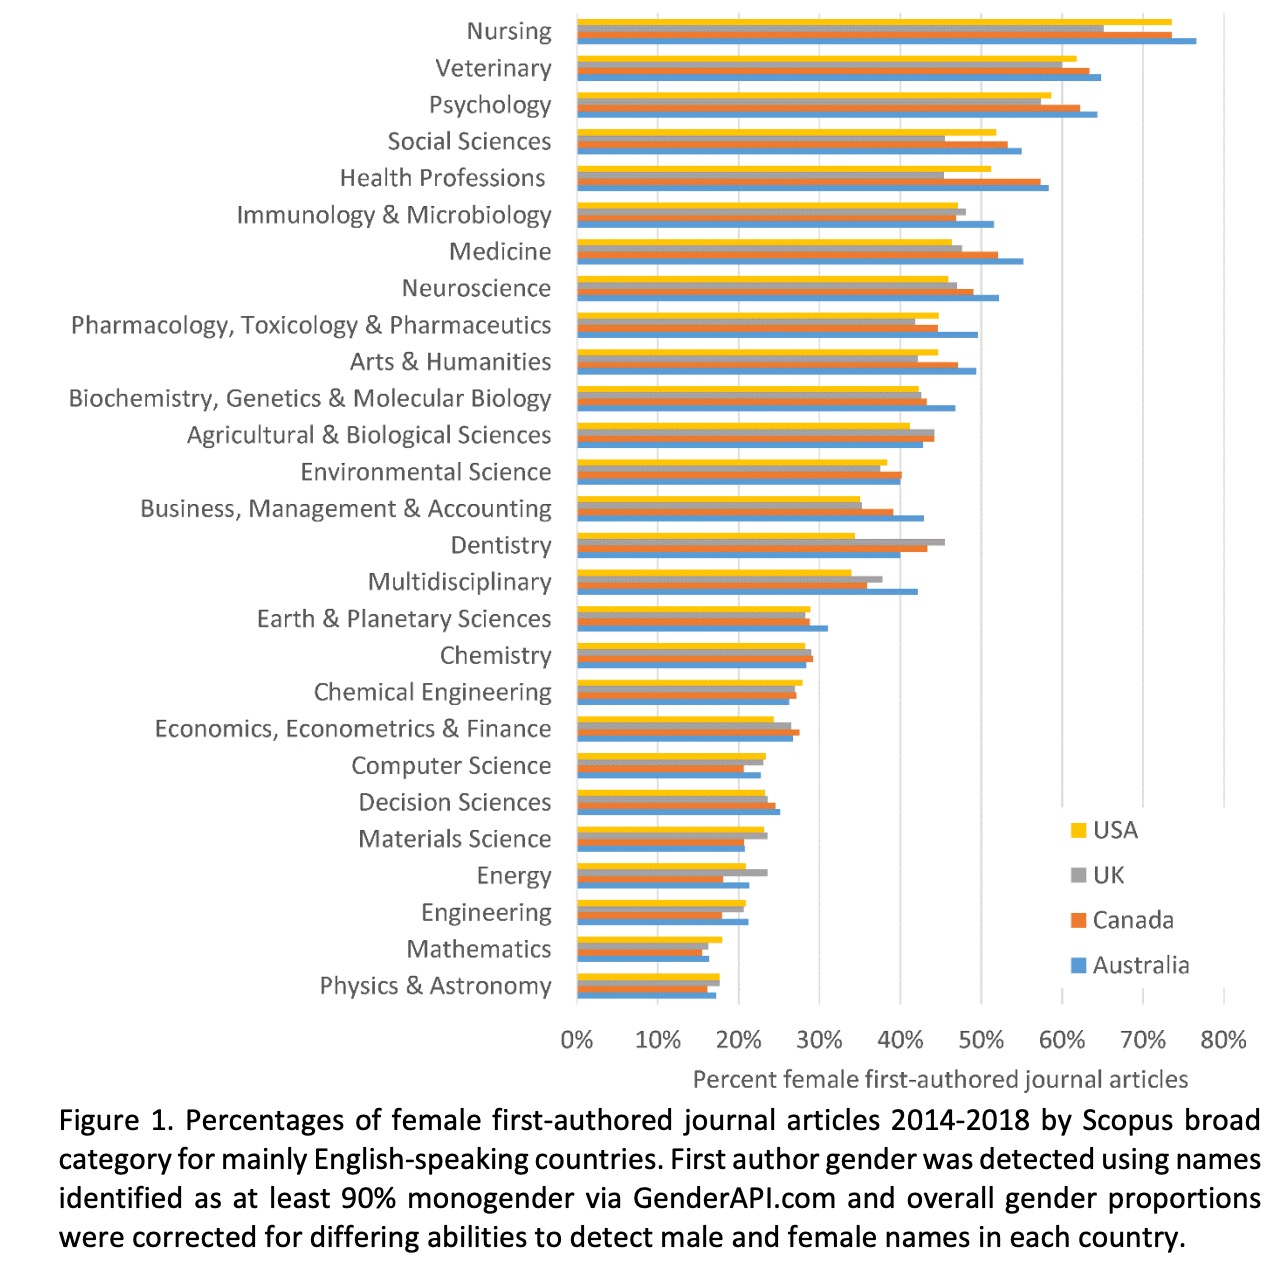 Mince hjem klar Research Article: “A Gender Equality Paradox in Academic Publishing:  Countries With a Higher Proportion of Female First-Authored Journal  Articles Have Larger First Author Gender Disparities Between Fields”  (Preprint)